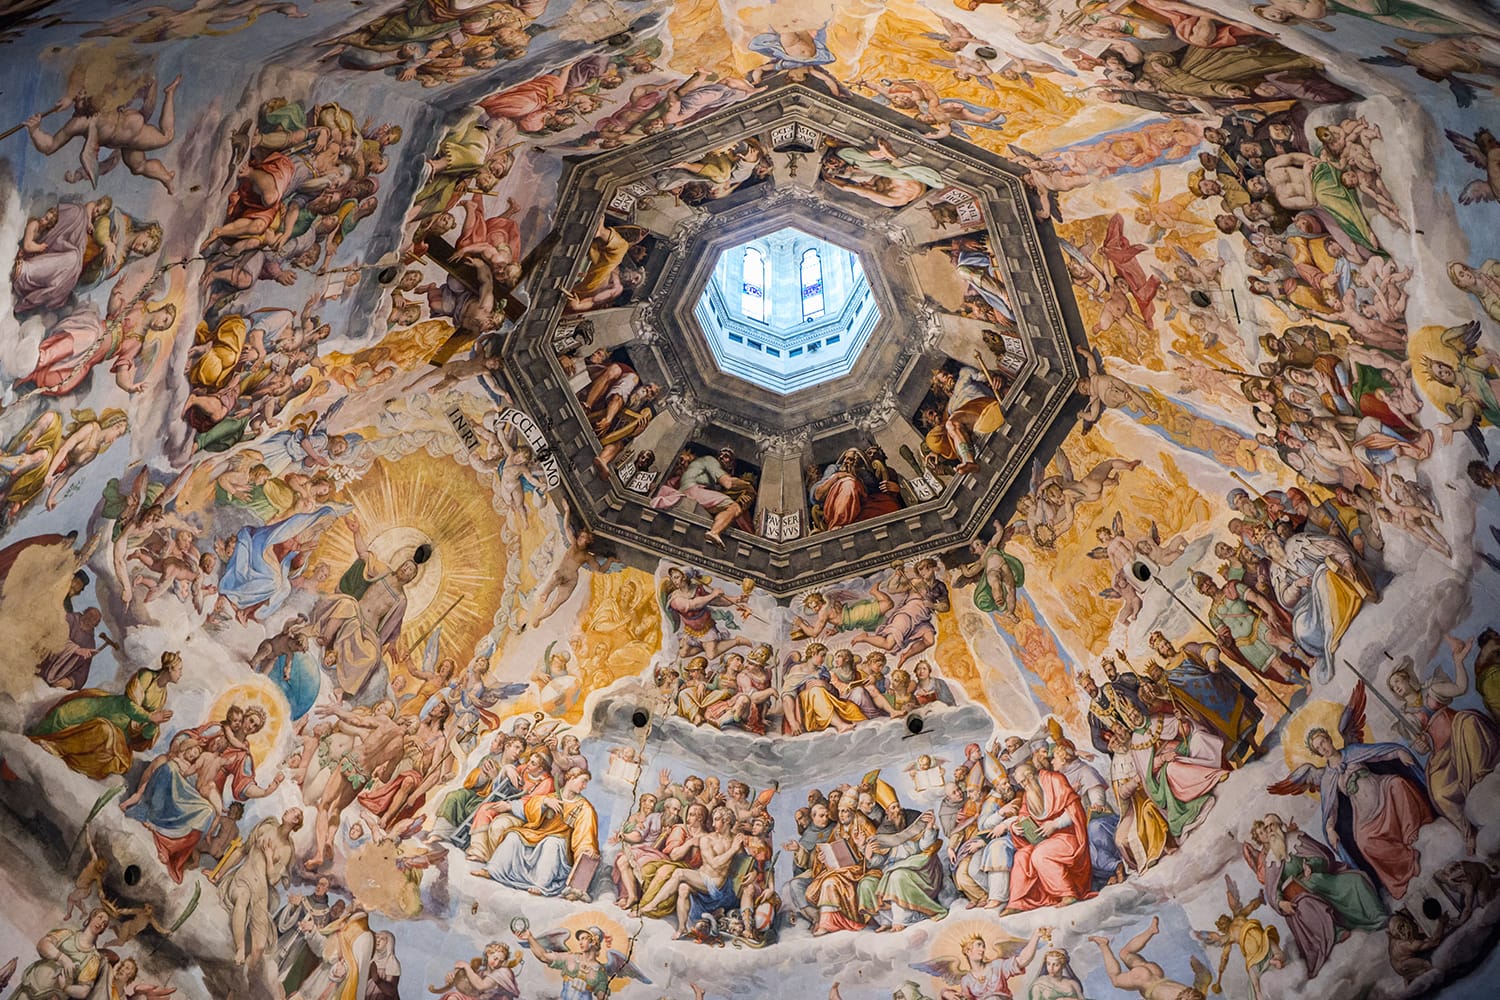 The Last Judgement by Giorgio Vasari and Federico Zuccari, detail from the cupola of the Duomo, Florence, Italy